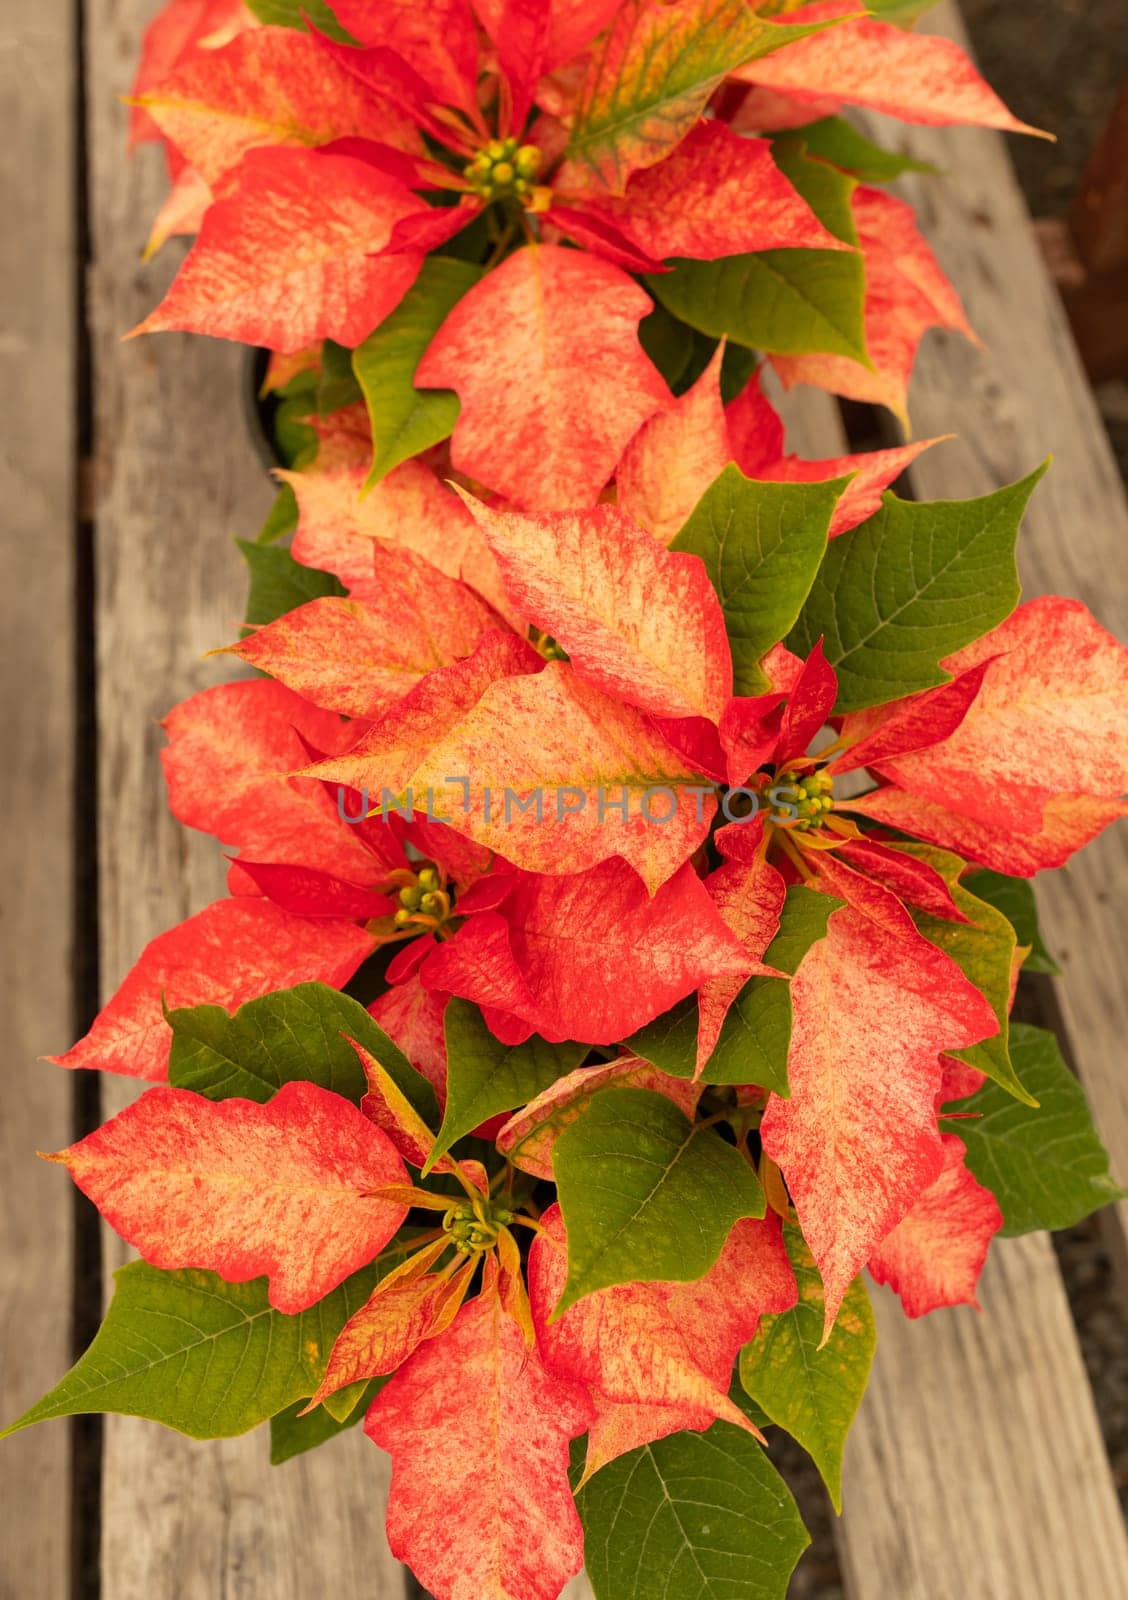 Potted Poinsettia Early Monet Twilight. Christmas Flower. Beautiful Euphorbia Pulcherrima, Top View, Vertical Plane. Plant Flower with Dark Green Foliage. Flora, Botany, Gardening